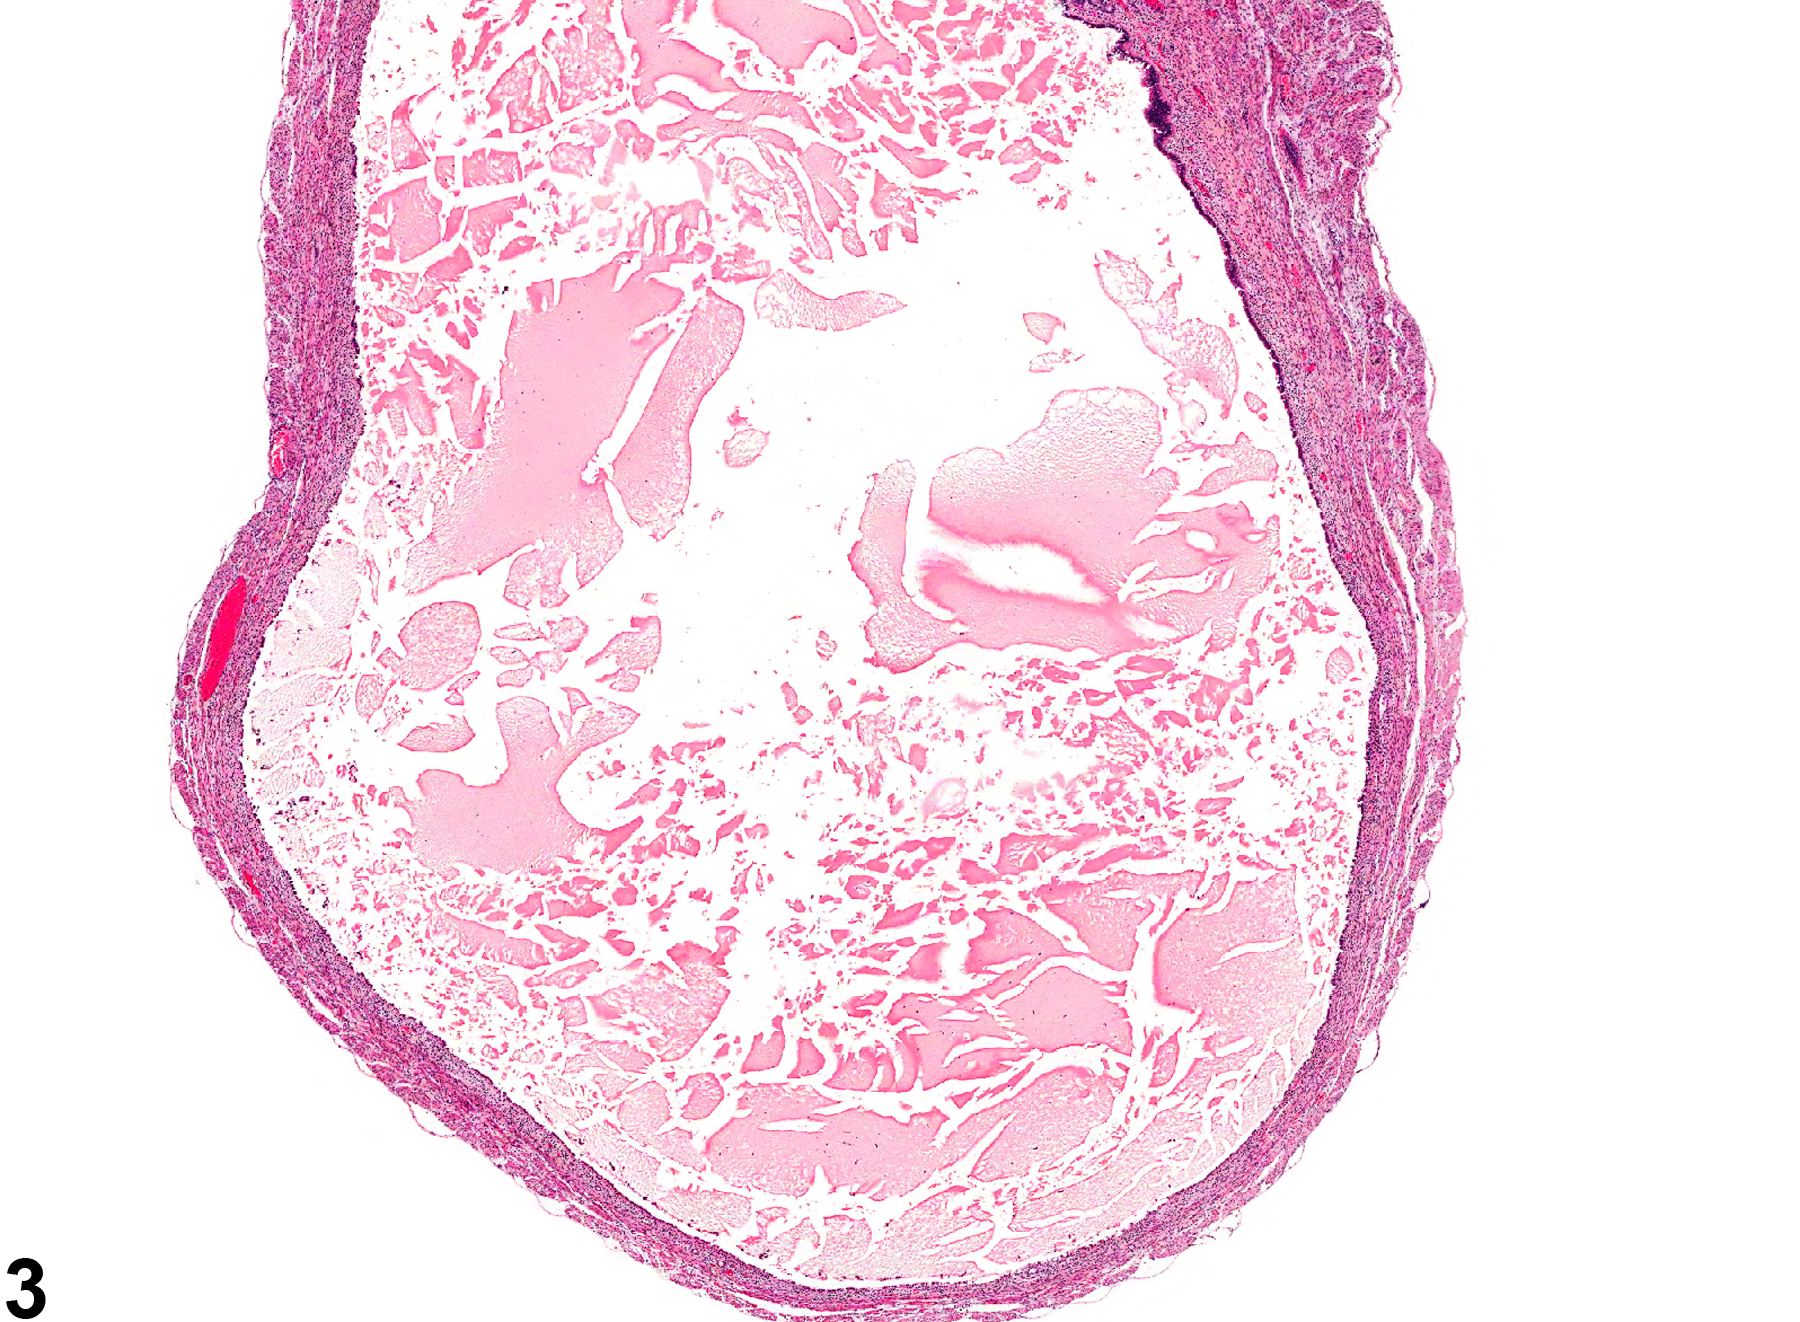 Image of dilation in the uterus from a female B6C3F1 mouse in a chronic study